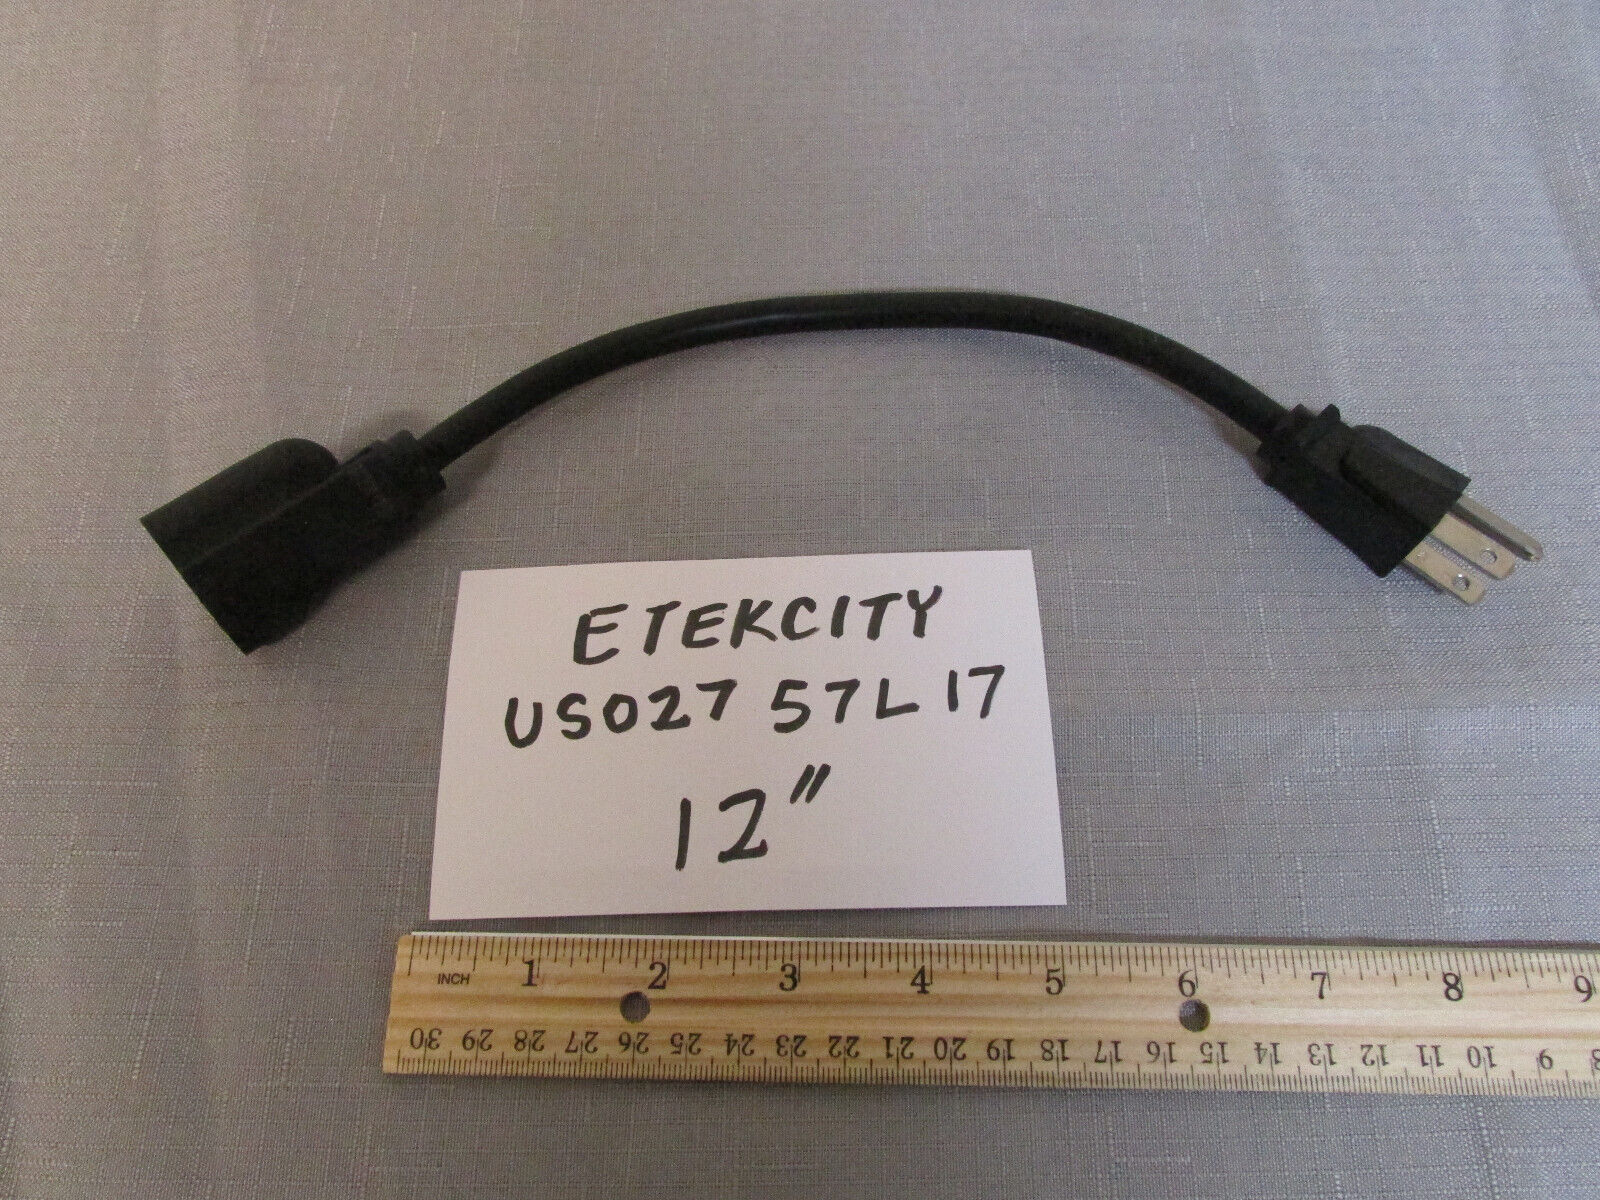 Etekcity Short Power Extension Cord 12 Inches Male-Female US027 57L17 NOS